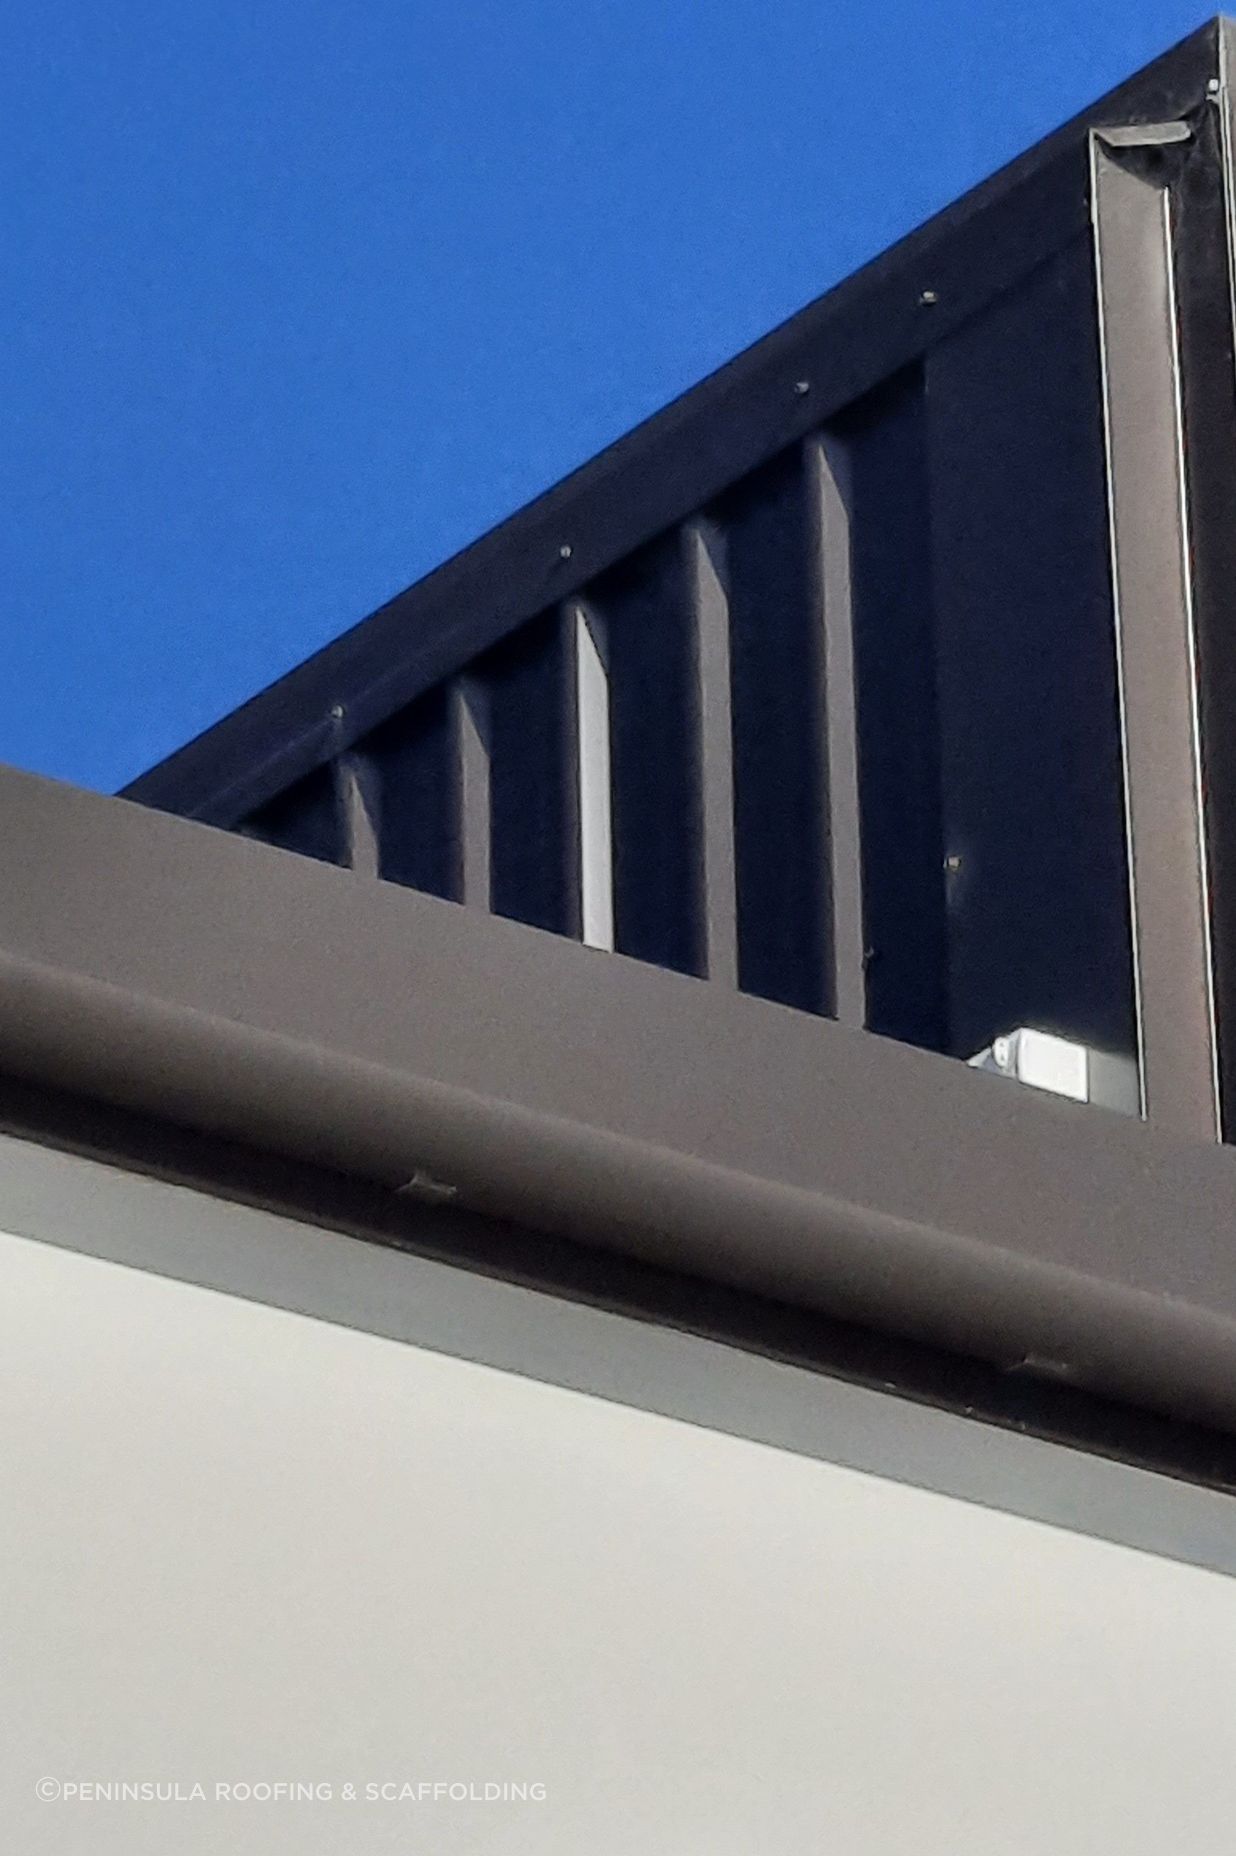 Detail of 175 Industrial Gutter “Ironsand” and vertical wall cladding to a precast concrete parapet wall